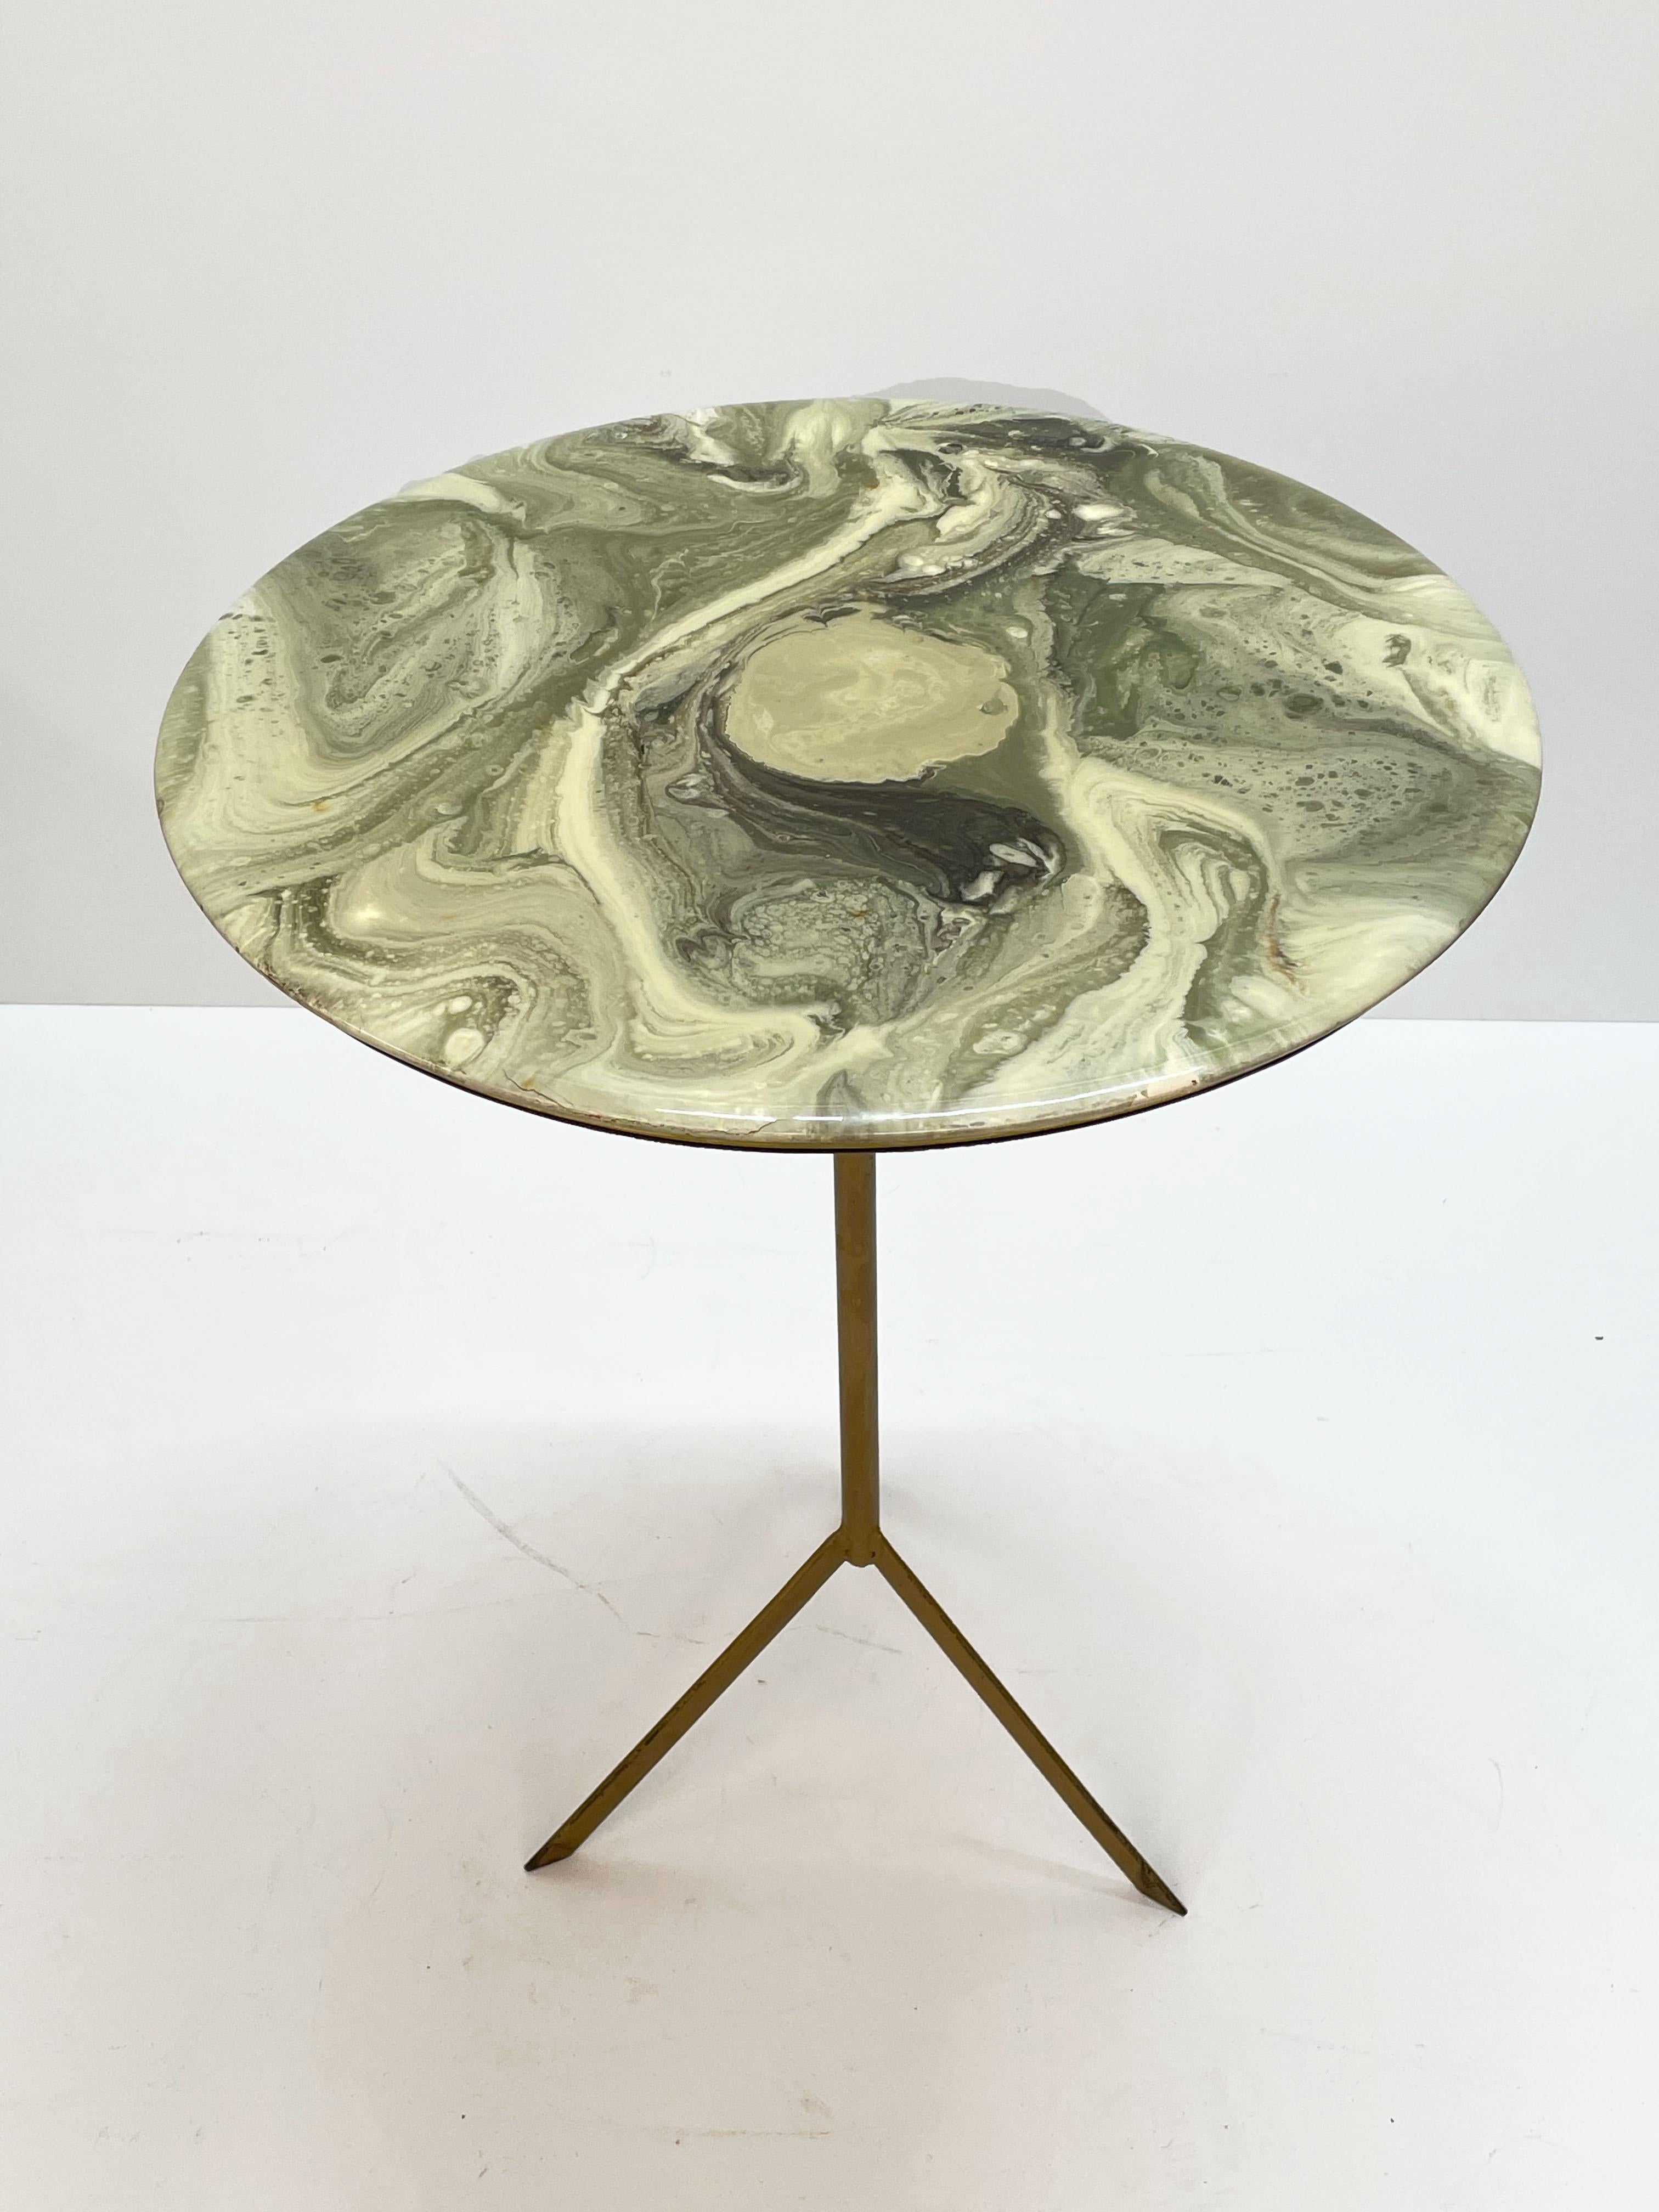 Midcentury Round Italian Gueridon Table with Marble Resin Top and Metal, 1950s For Sale 3